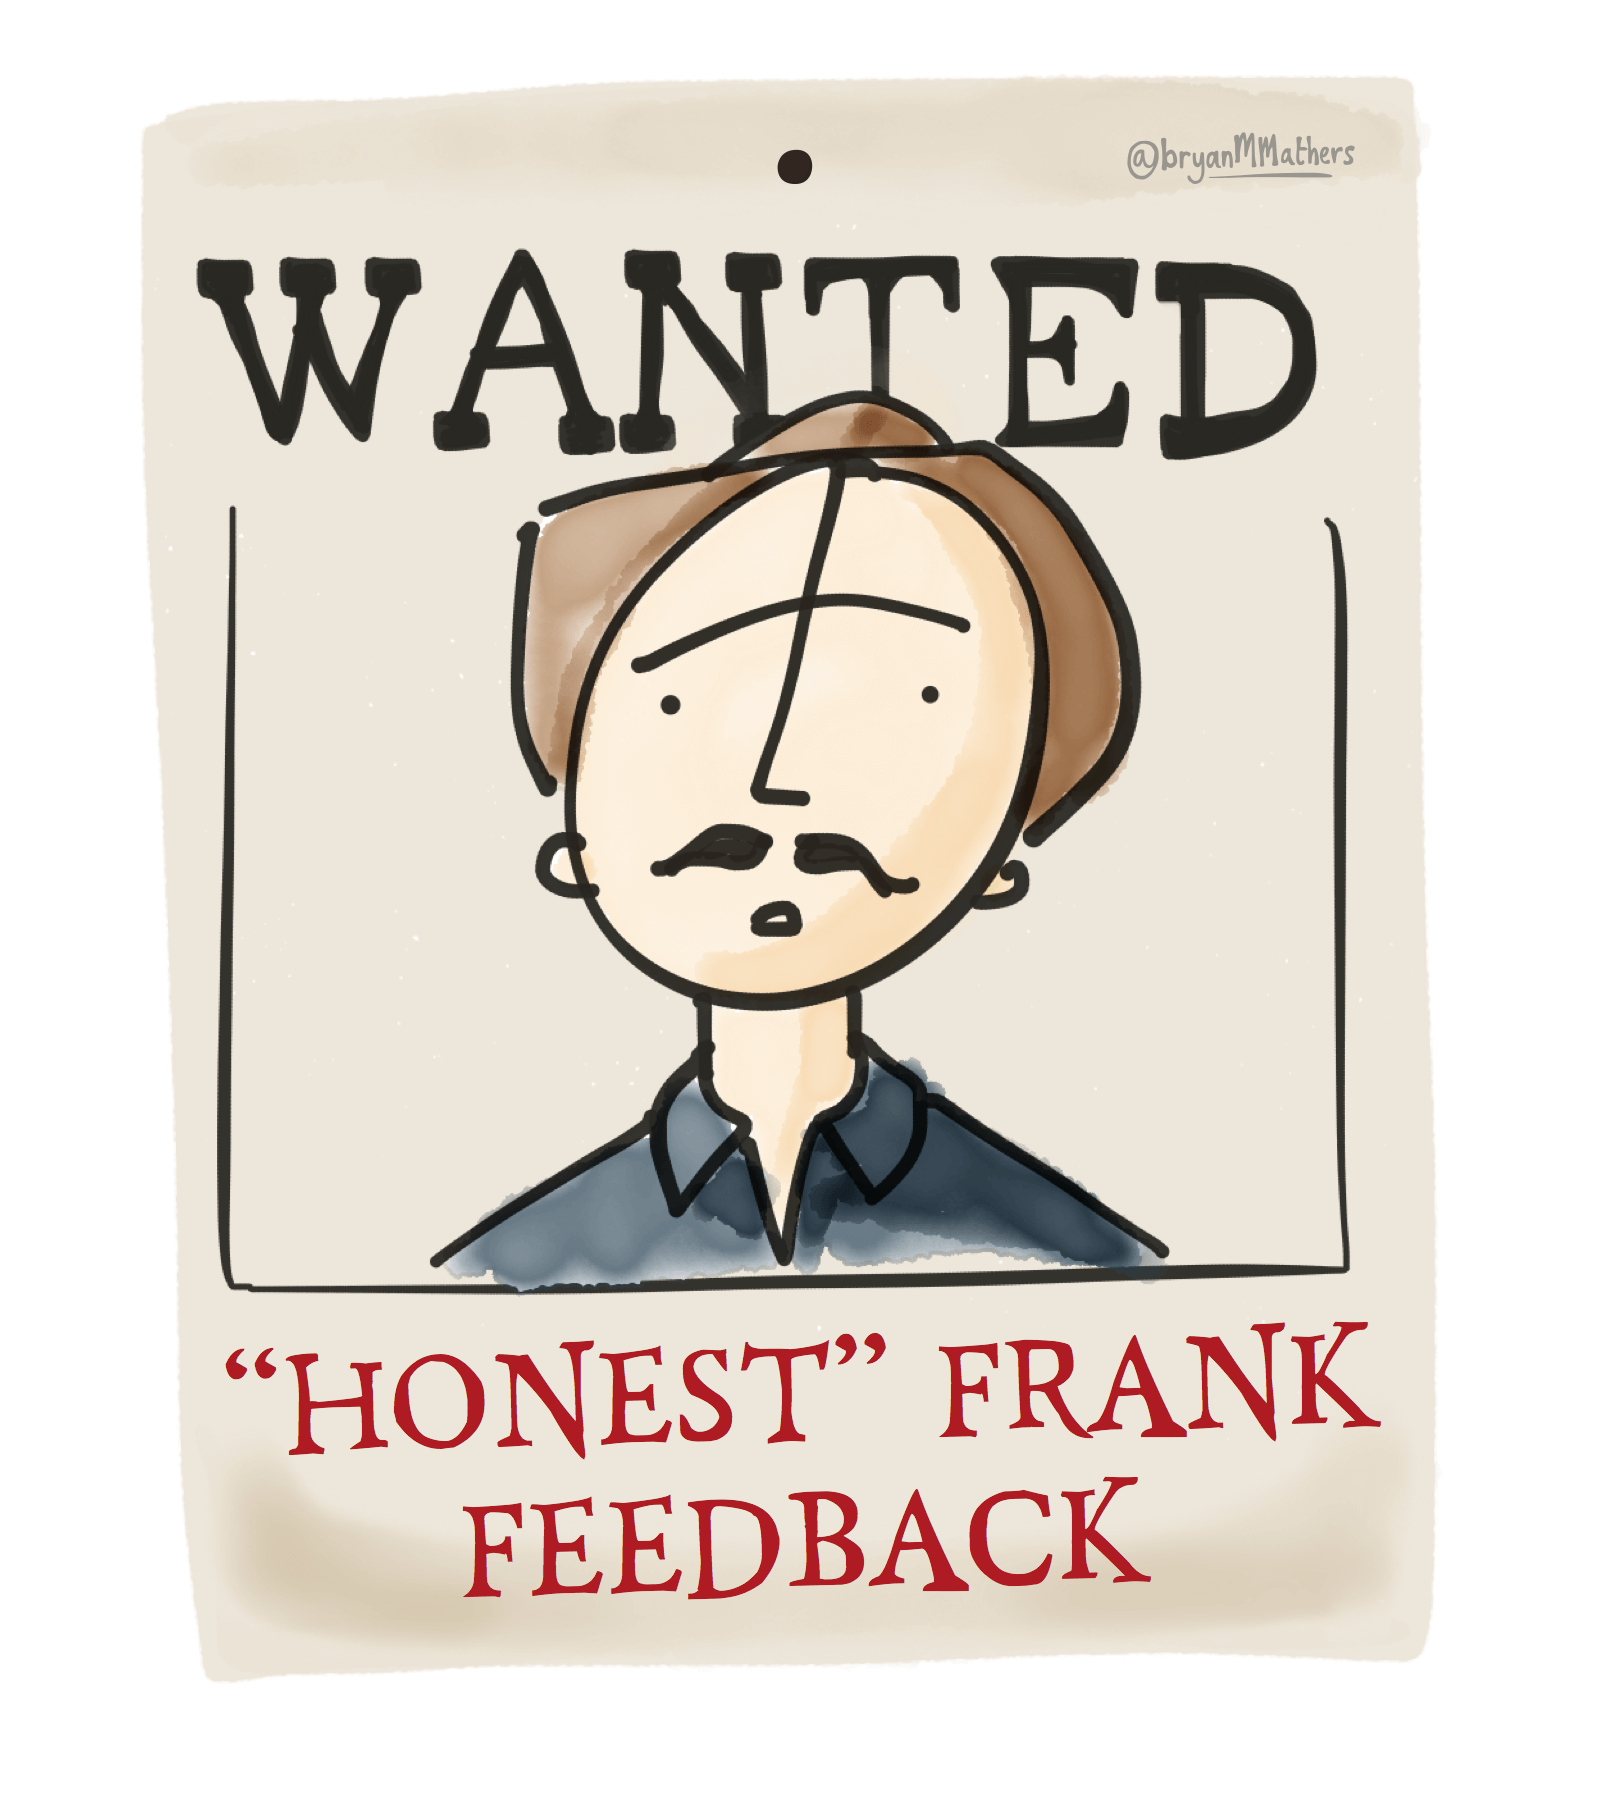 WANTED (DEAD OR ALIVE) HONEST FRANK FEEDBACK To improve your CV you want honest frank feedback on it. Frank Feedback and Francesca Feedback aren’t judging you, they are judging your CV. Honest feedback will see beyond good or bad and will tell you where you can improve, not just in what you’ve presented but also what’s missing and what you need to focus on in the future to continue your professional development (CPD). So, who are the people you could ask for honest feedback? Can you return their favour and give them some feedback on theirs? WANTED: Honest Frank Feedback artwork by Visual Thinkery is licensed under CC-BY-ND